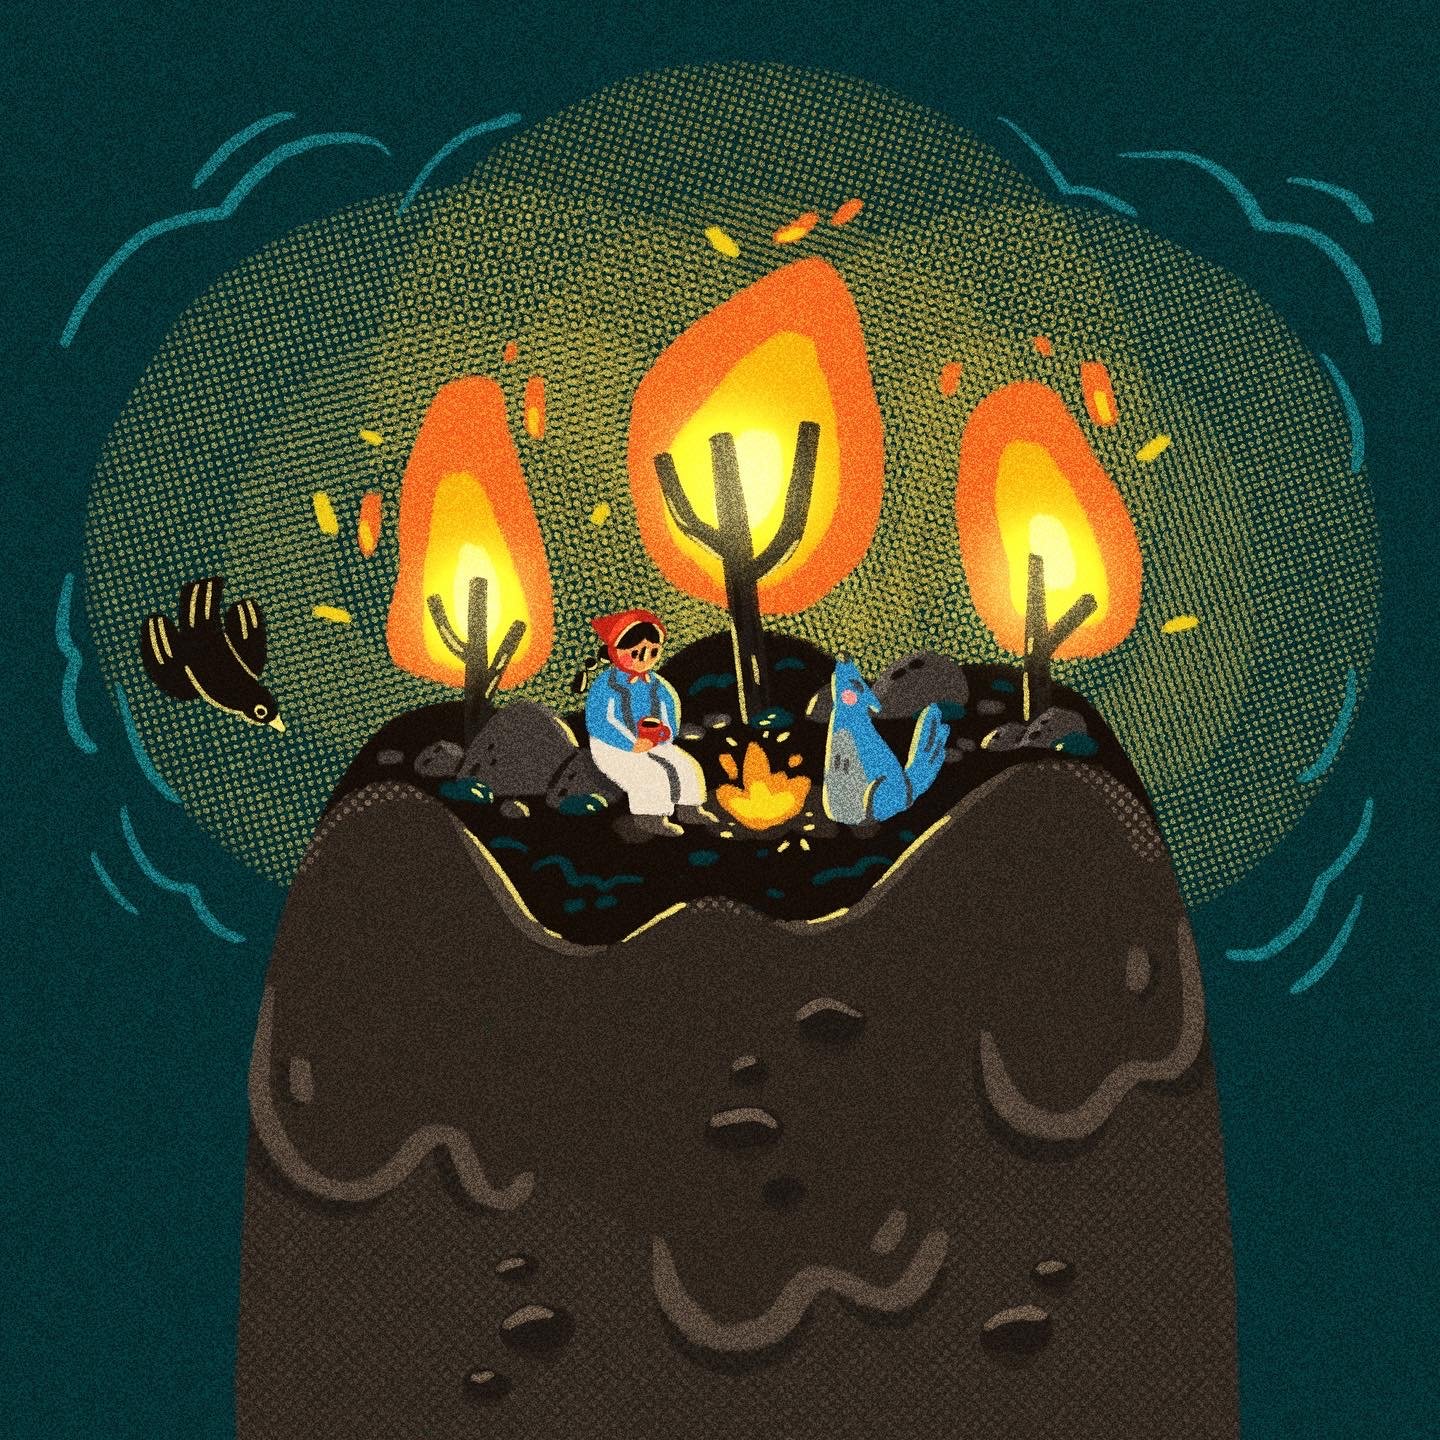 Illustration for Peachtober '23 prompt "Candle"